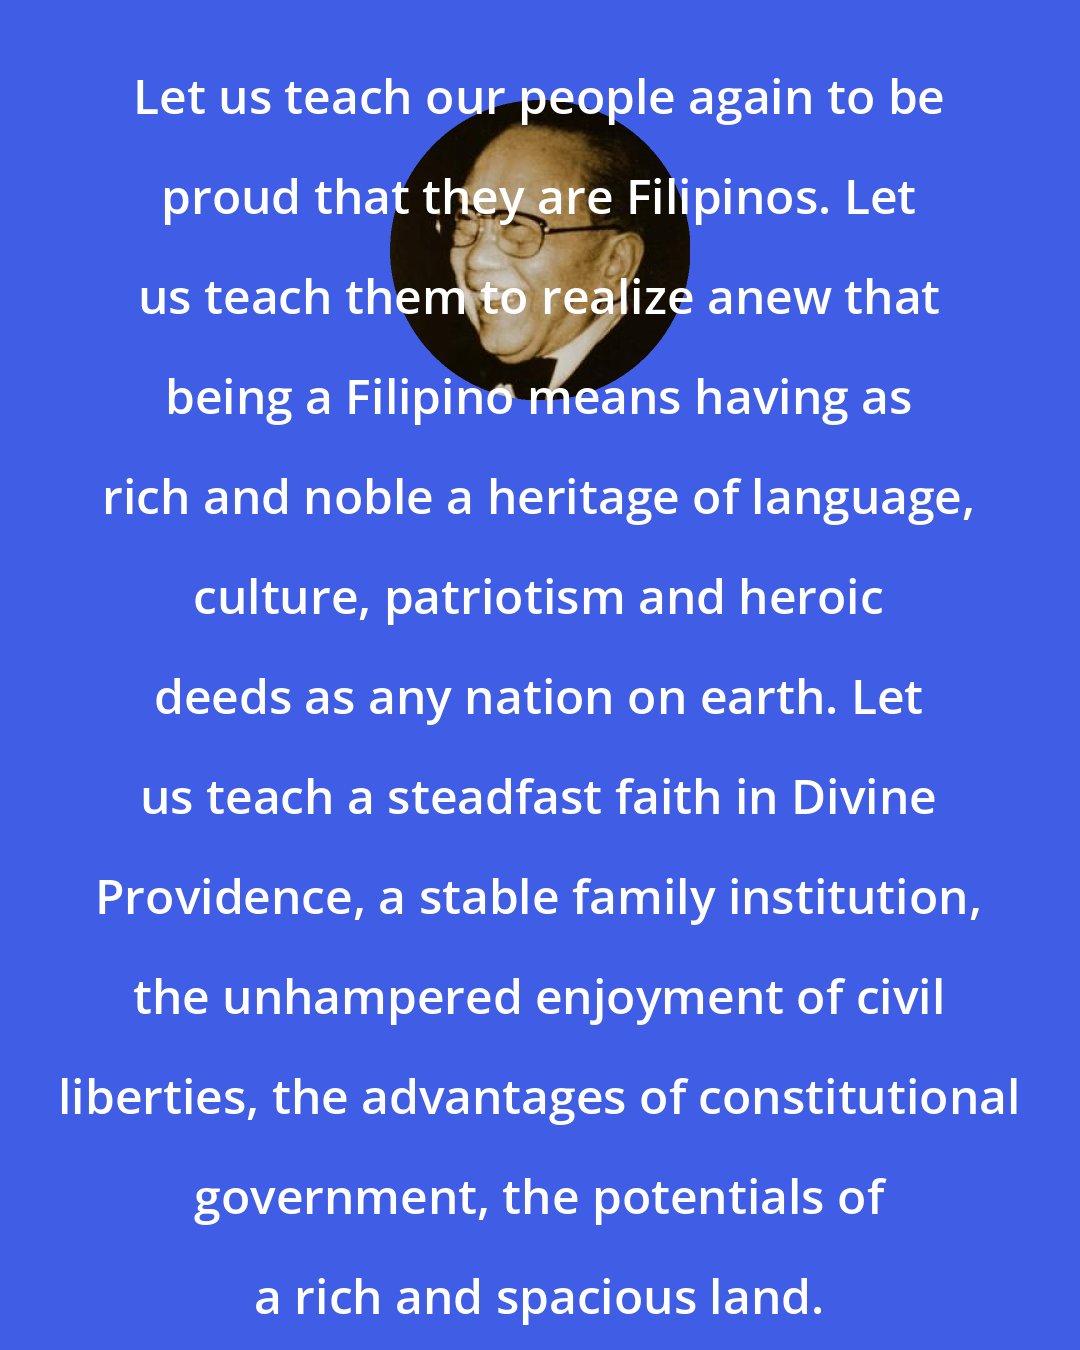 Carlos P. Romulo: Let us teach our people again to be proud that they are Filipinos. Let us teach them to realize anew that being a Filipino means having as rich and noble a heritage of language, culture, patriotism and heroic deeds as any nation on earth. Let us teach a steadfast faith in Divine Providence, a stable family institution, the unhampered enjoyment of civil liberties, the advantages of constitutional government, the potentials of a rich and spacious land.